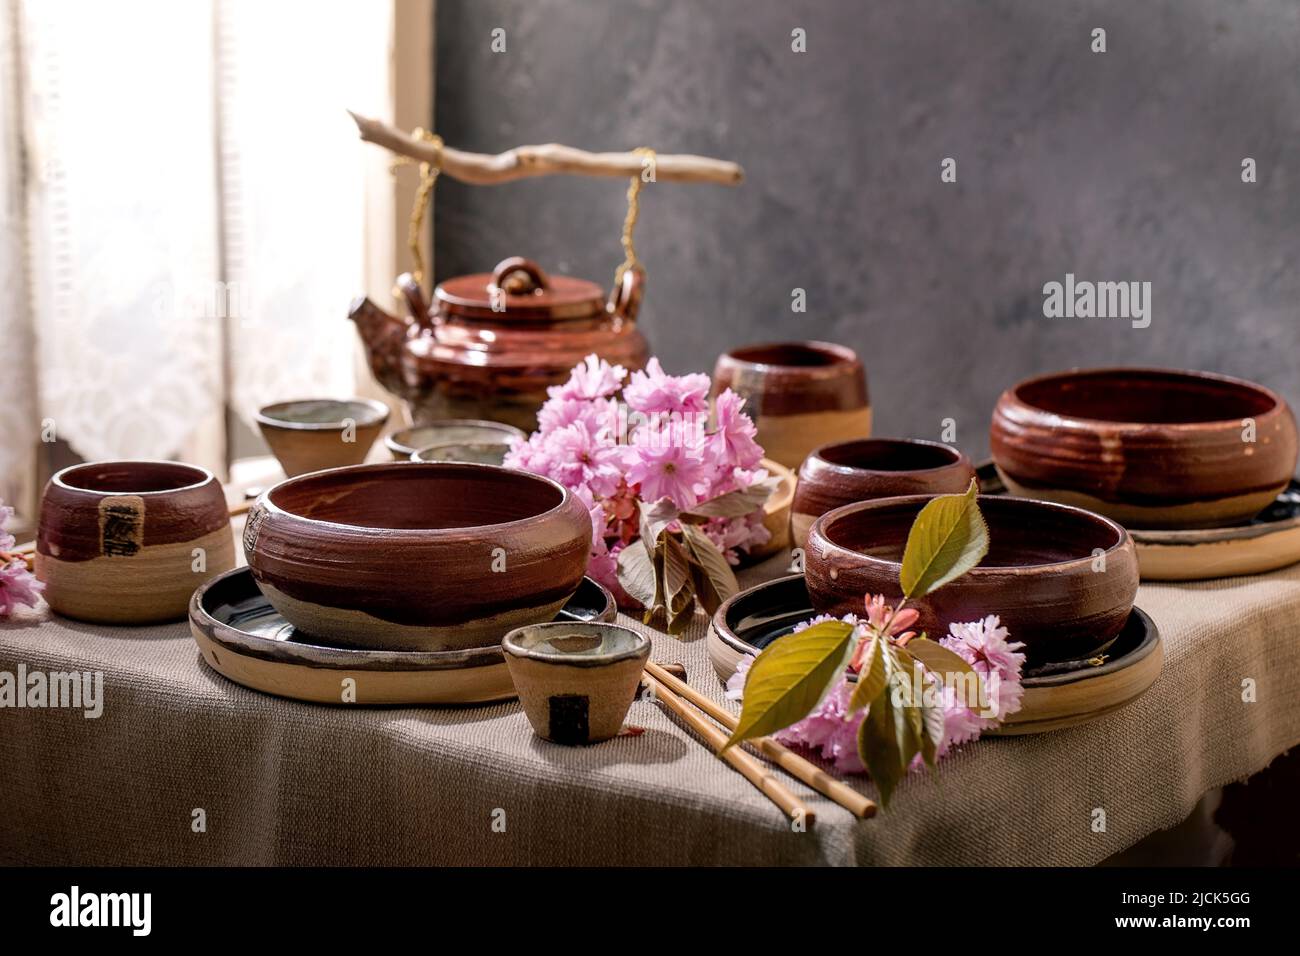 Japanese Asian style table setting with empty craft ceramic tableware, brown rough bowls, kettle and cups on linen tablecloth, decorated by pink sprin Stock Photo